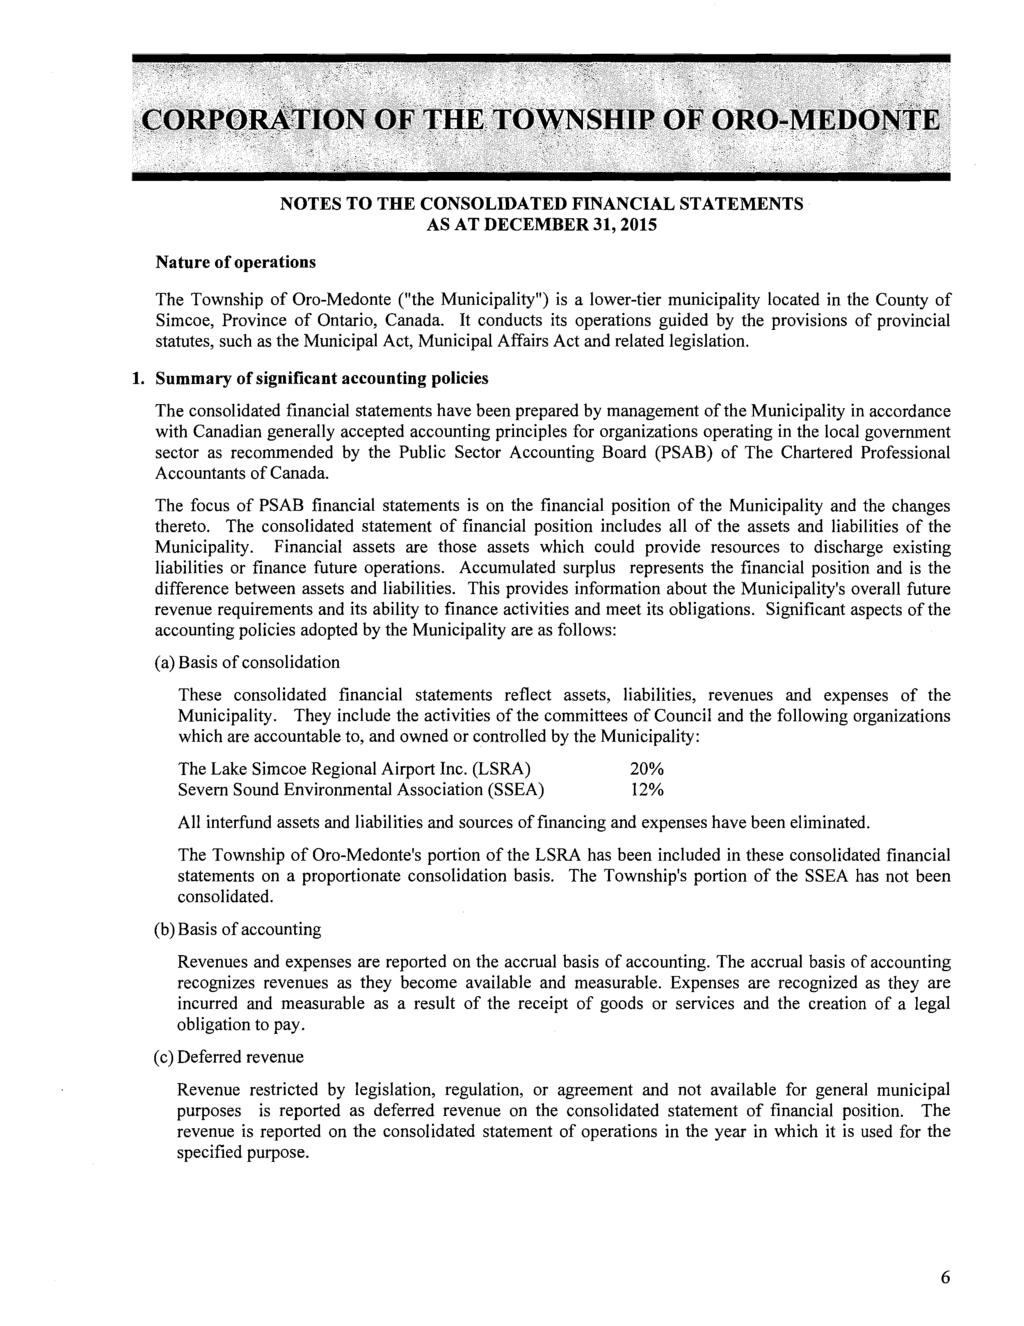 Nature of operations NOTES TO THE CONSOLIDATED FINANCIAL STATEMENTS AS AT DECEMBER 31, 2015 The Township of Oro-Medonte ("the Municipality") is a lower-tier municipality located in the County of